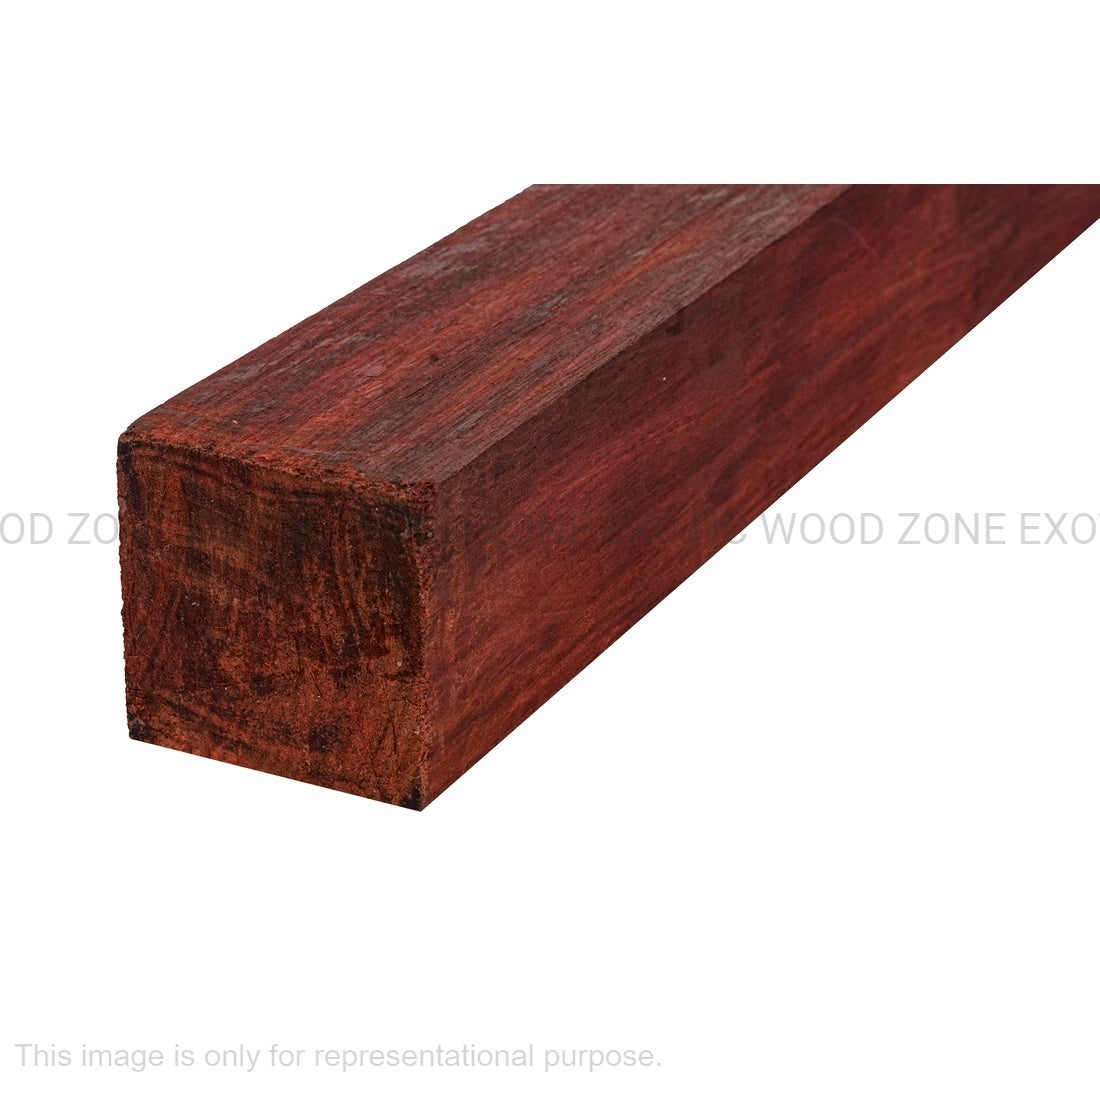 Redheart Wood Turning Blanks 1-1/2&quot; x 1-1/2&quot; x 24&quot; - Exotic Wood Zone - Buy online Across USA 